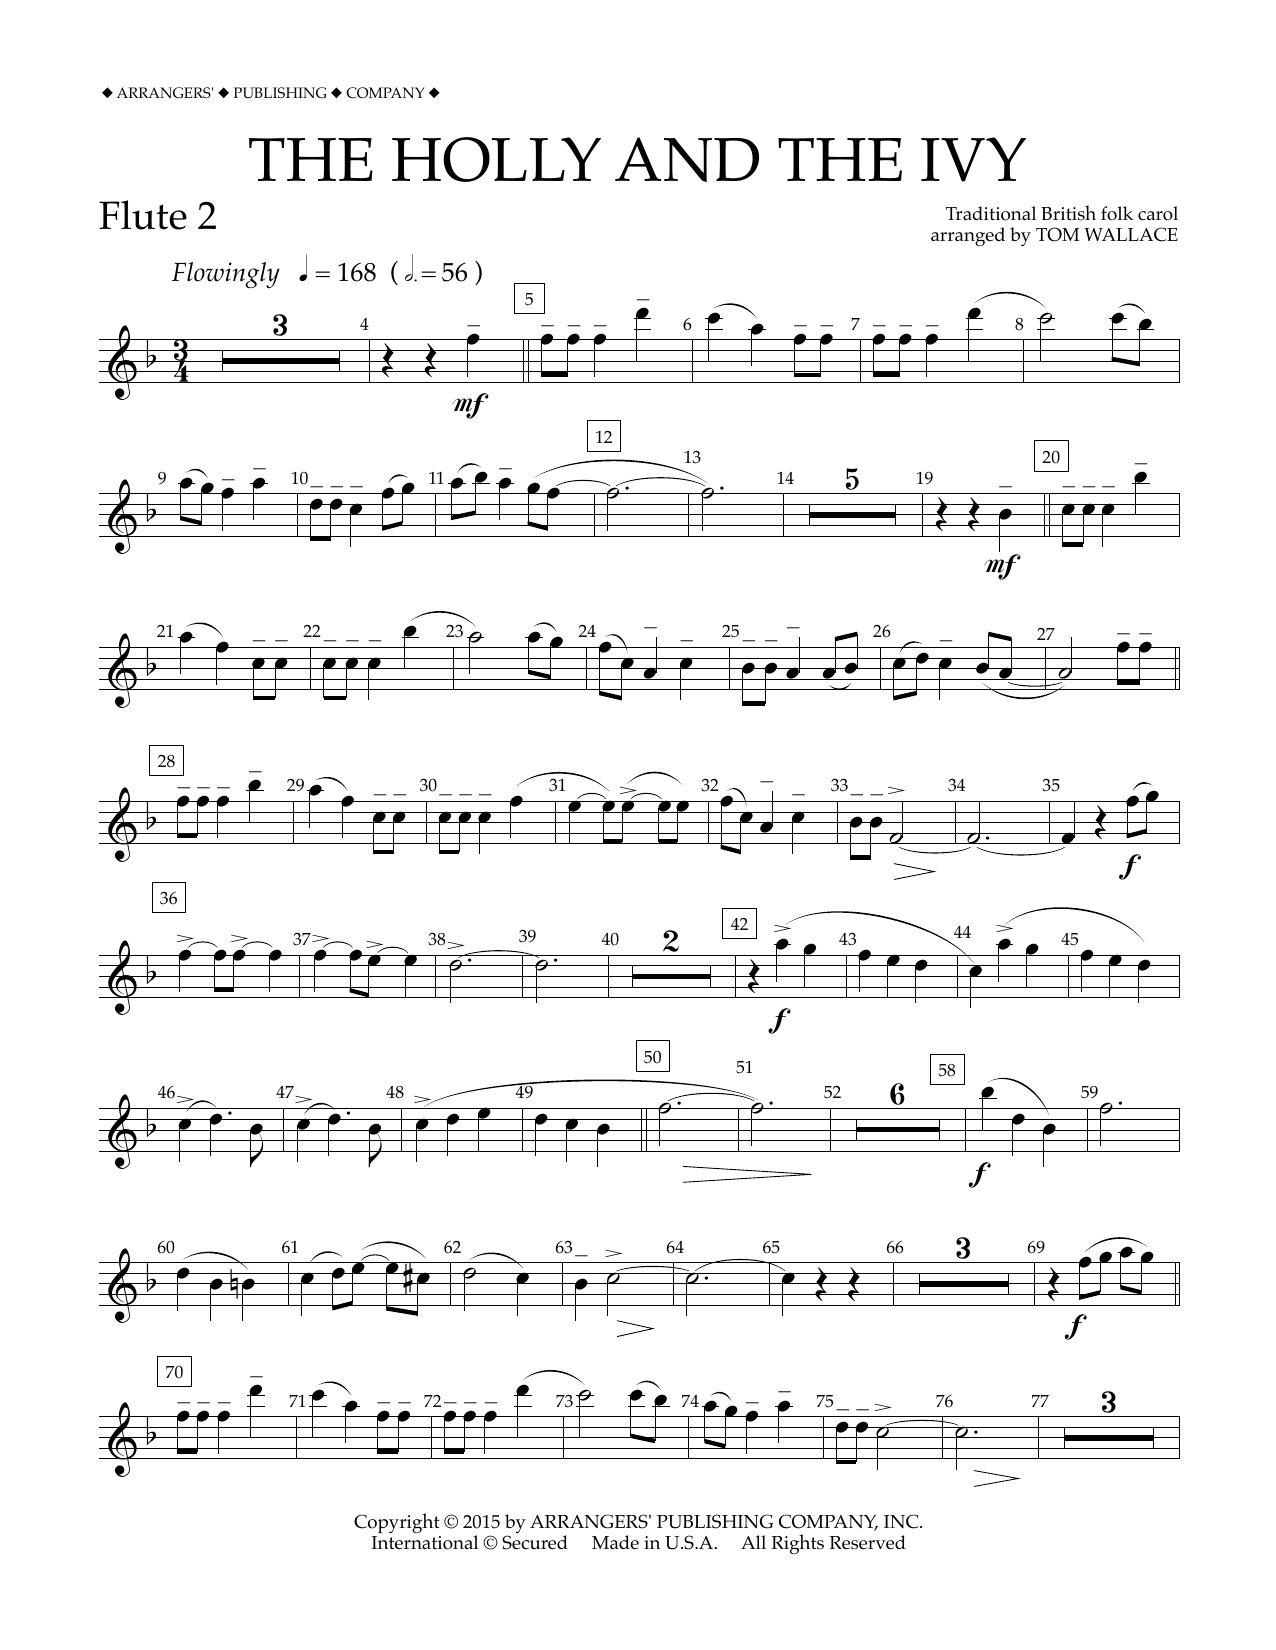 Download Tom Wallace The Holly and the Ivy - Flute 2 Sheet Music